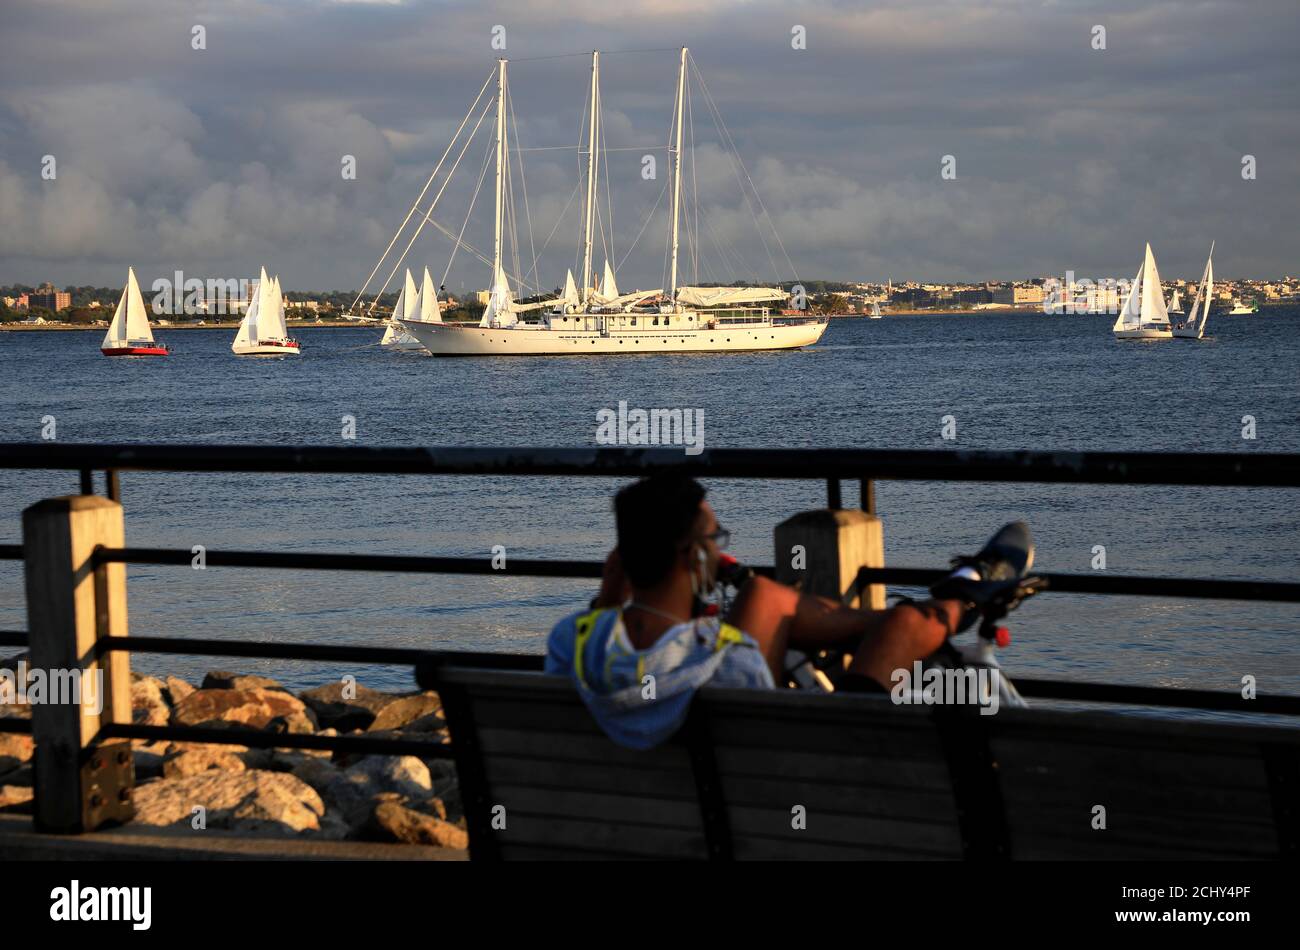 Man relaxing on a bench at Hudson River Waterfront Walkway with sailboats in the water of Upper New York Bay in background.Liberty State Park NJ.USA Stock Photo